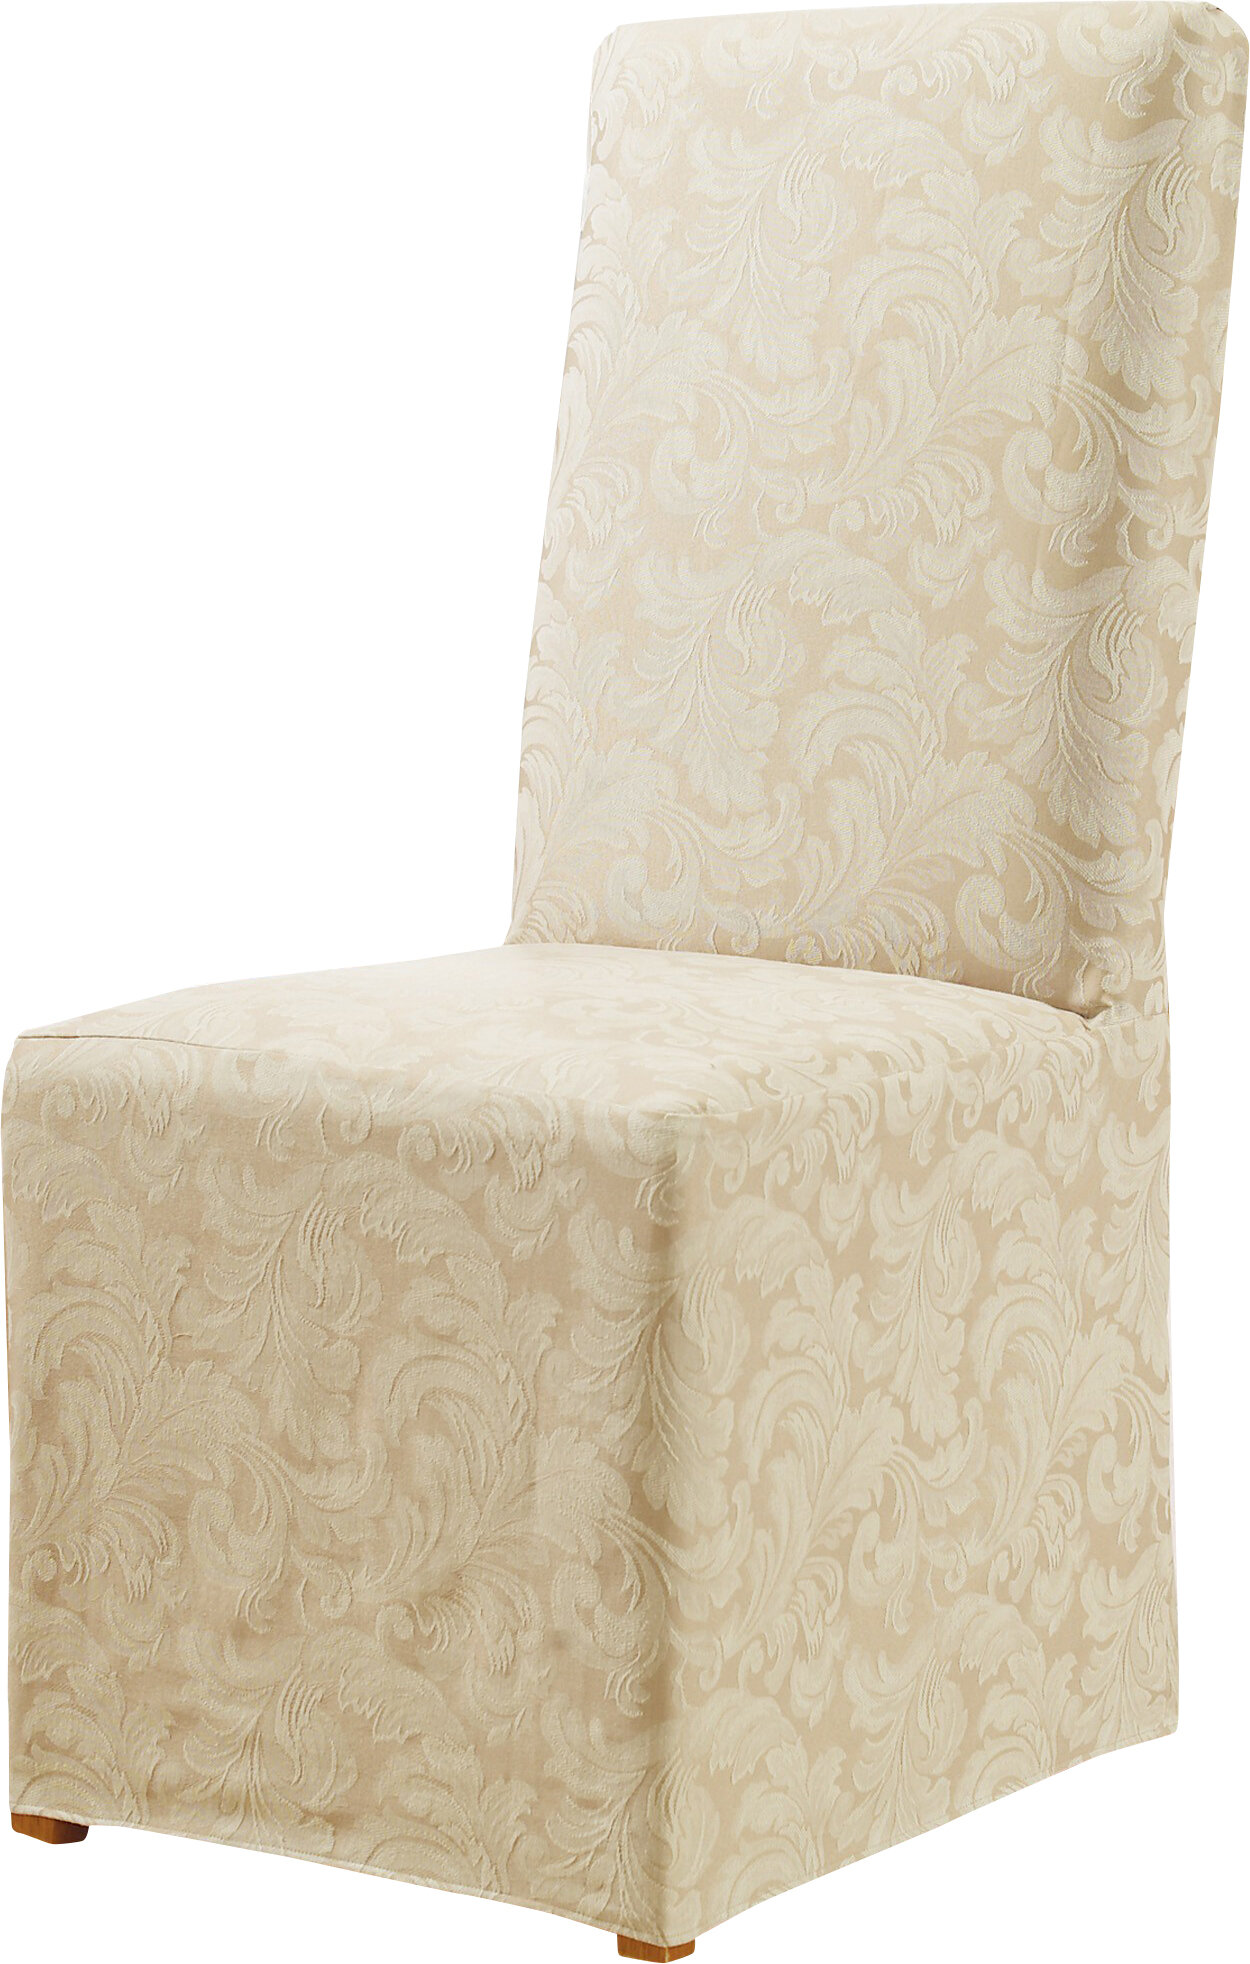 Sure Fit Scroll Classic Dining Chair Skirted Slipcover Reviews